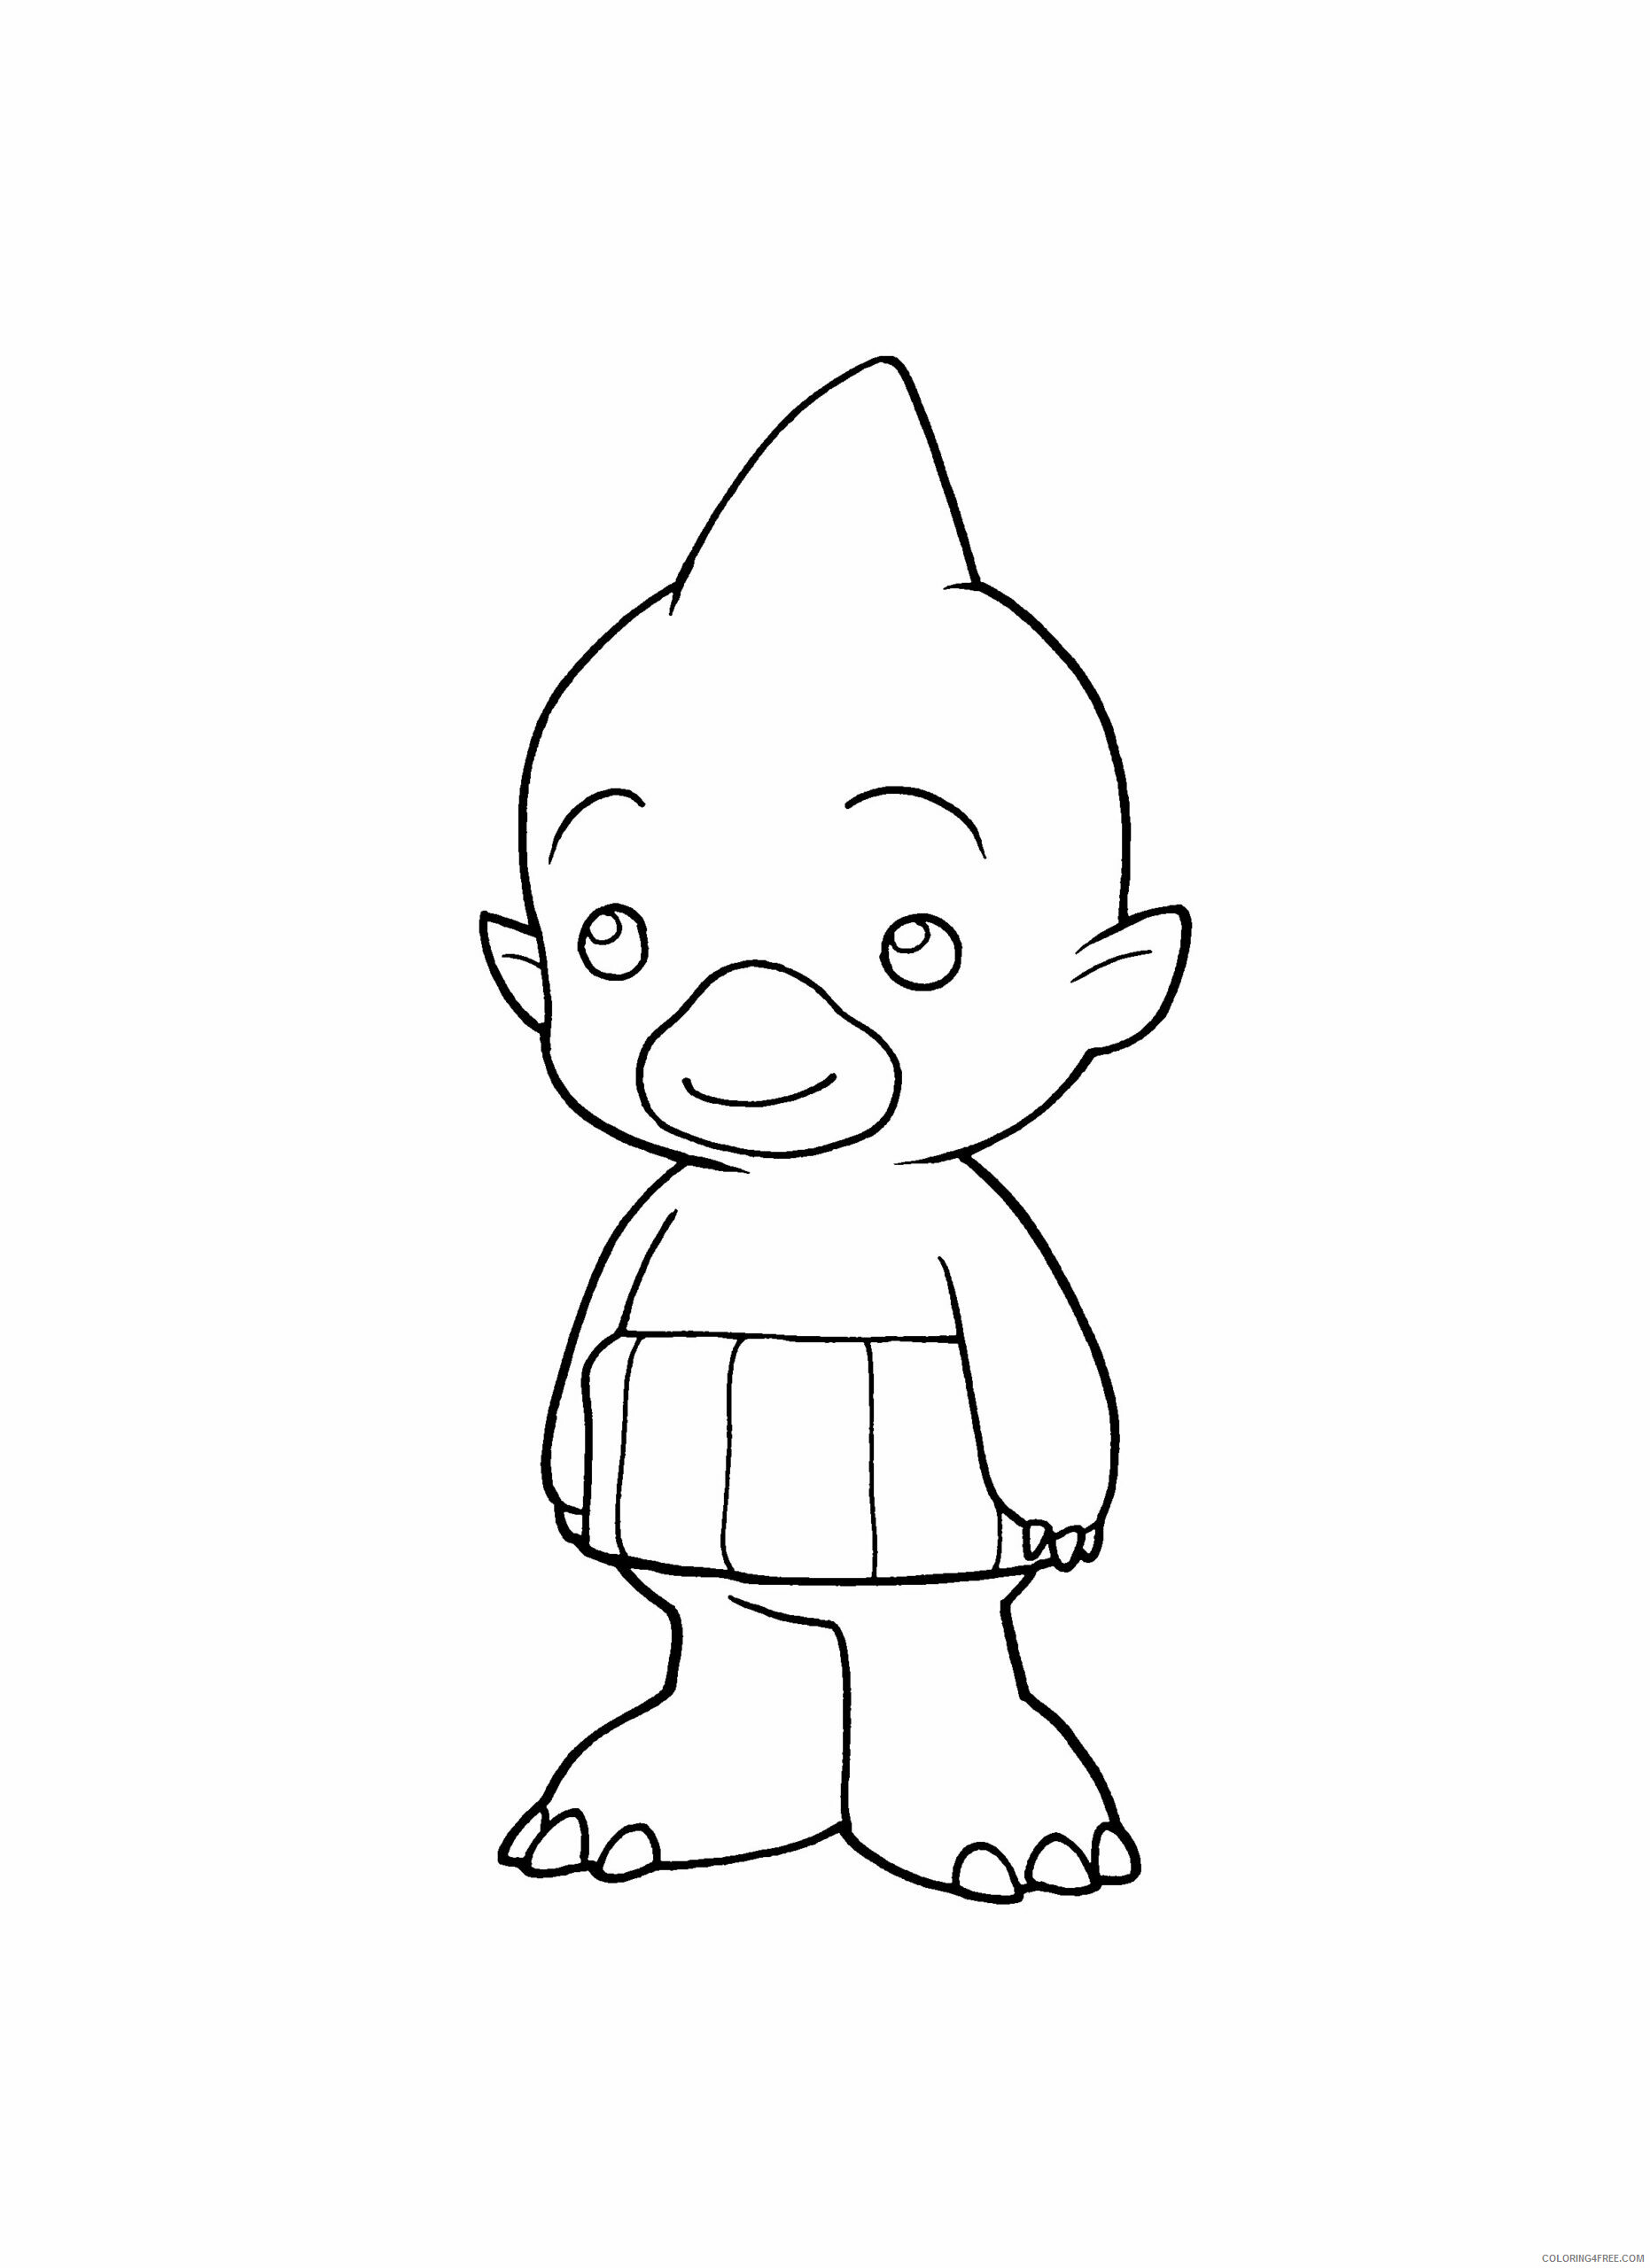 Digimon Printable Coloring Pages Anime digimon 78 2021 0374 Coloring4free